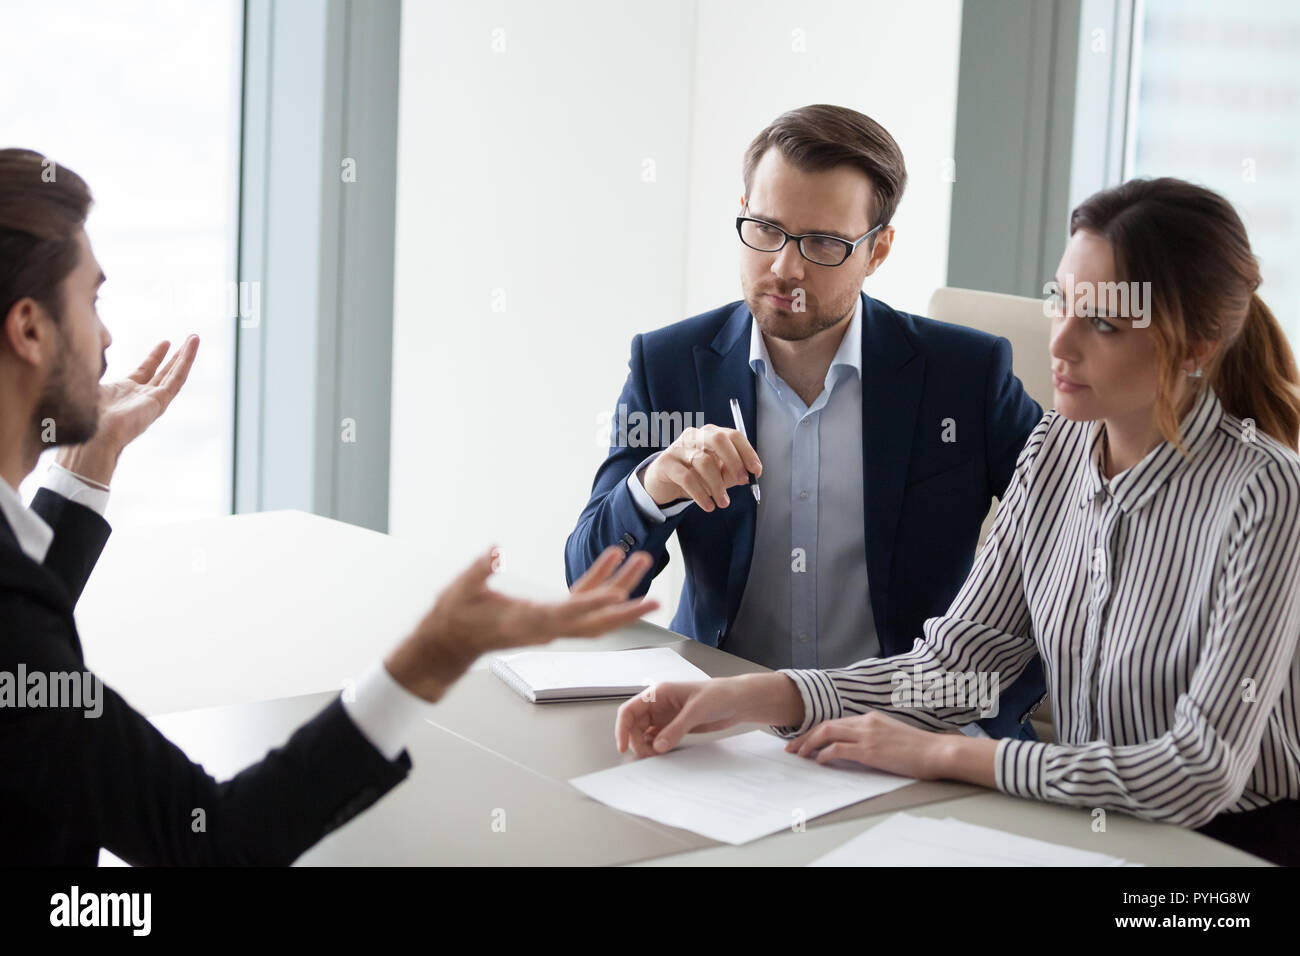 Two hr managers listen attentively to candidate for vacancy. Stock Photo